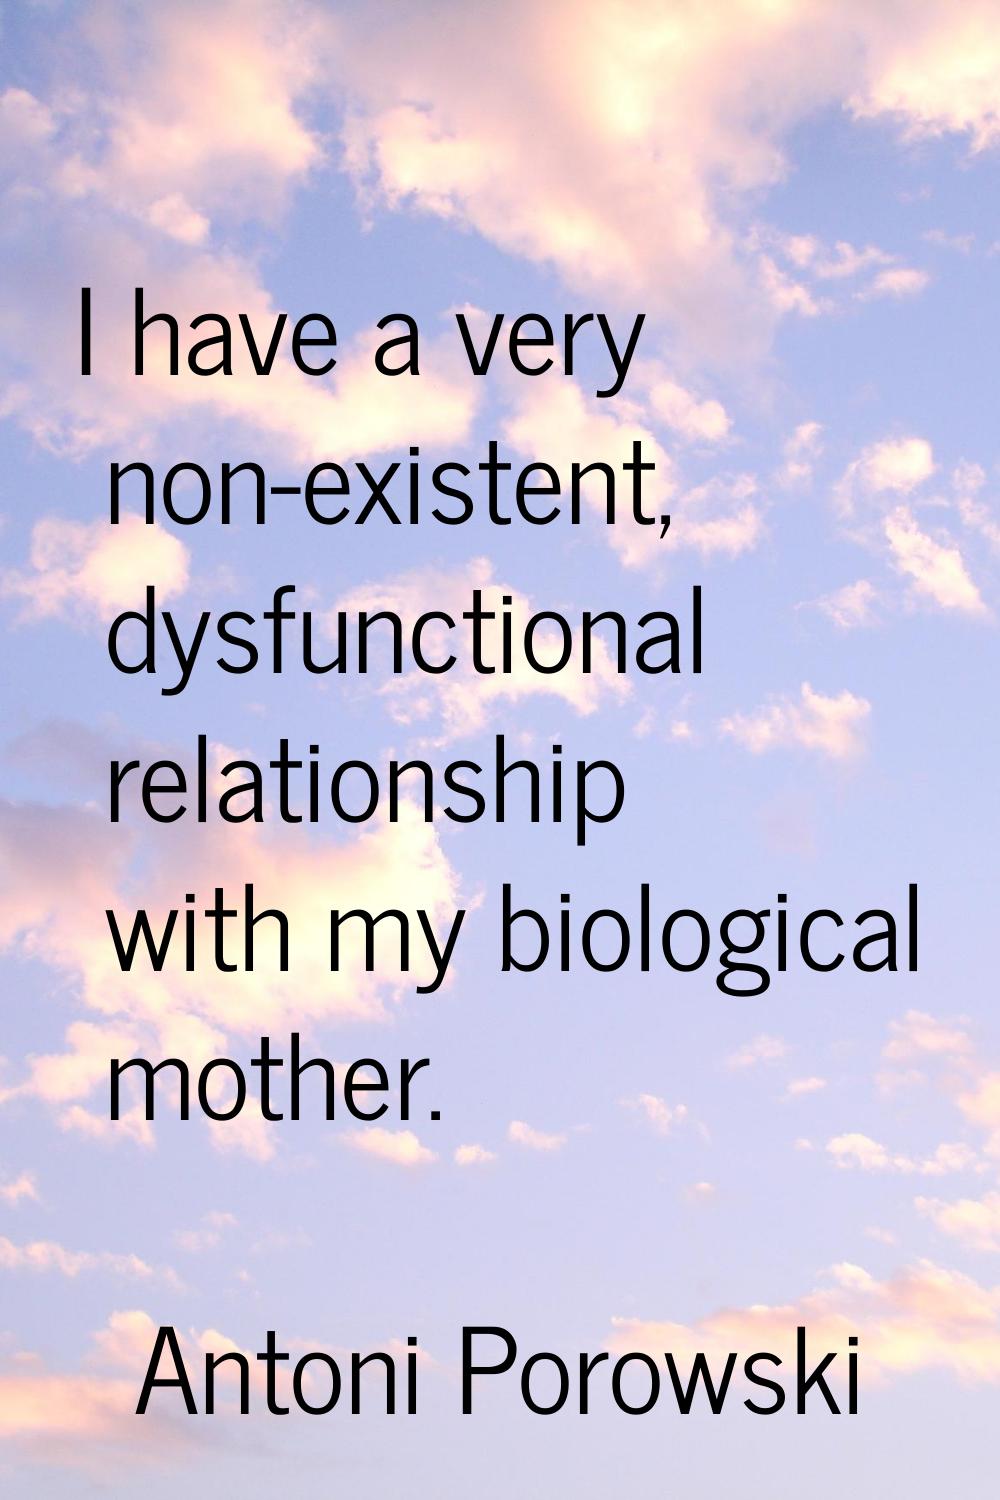 I have a very non-existent, dysfunctional relationship with my biological mother.